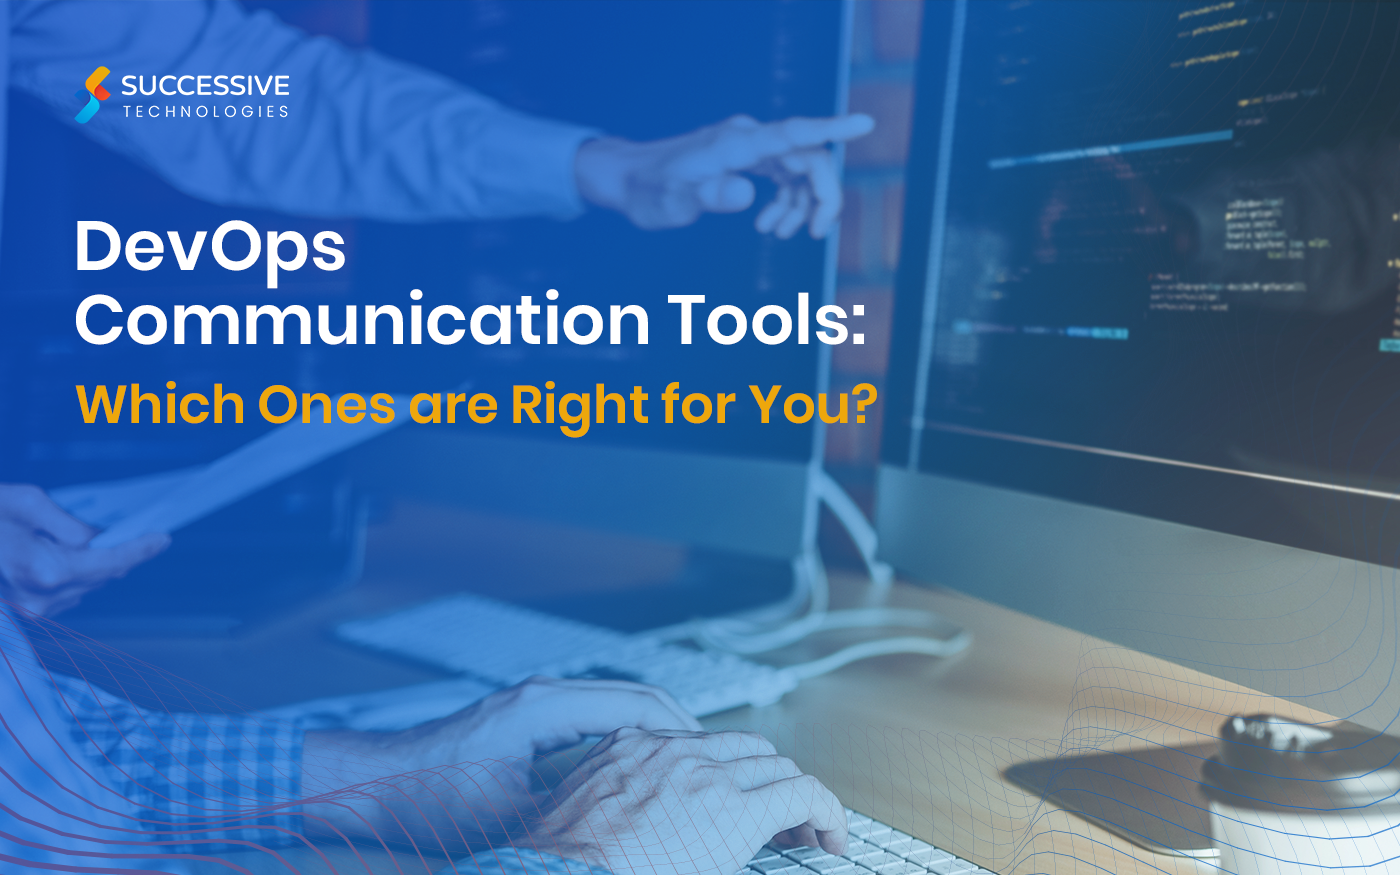 DevOps Communication Tools: Which Ones are Right for You?